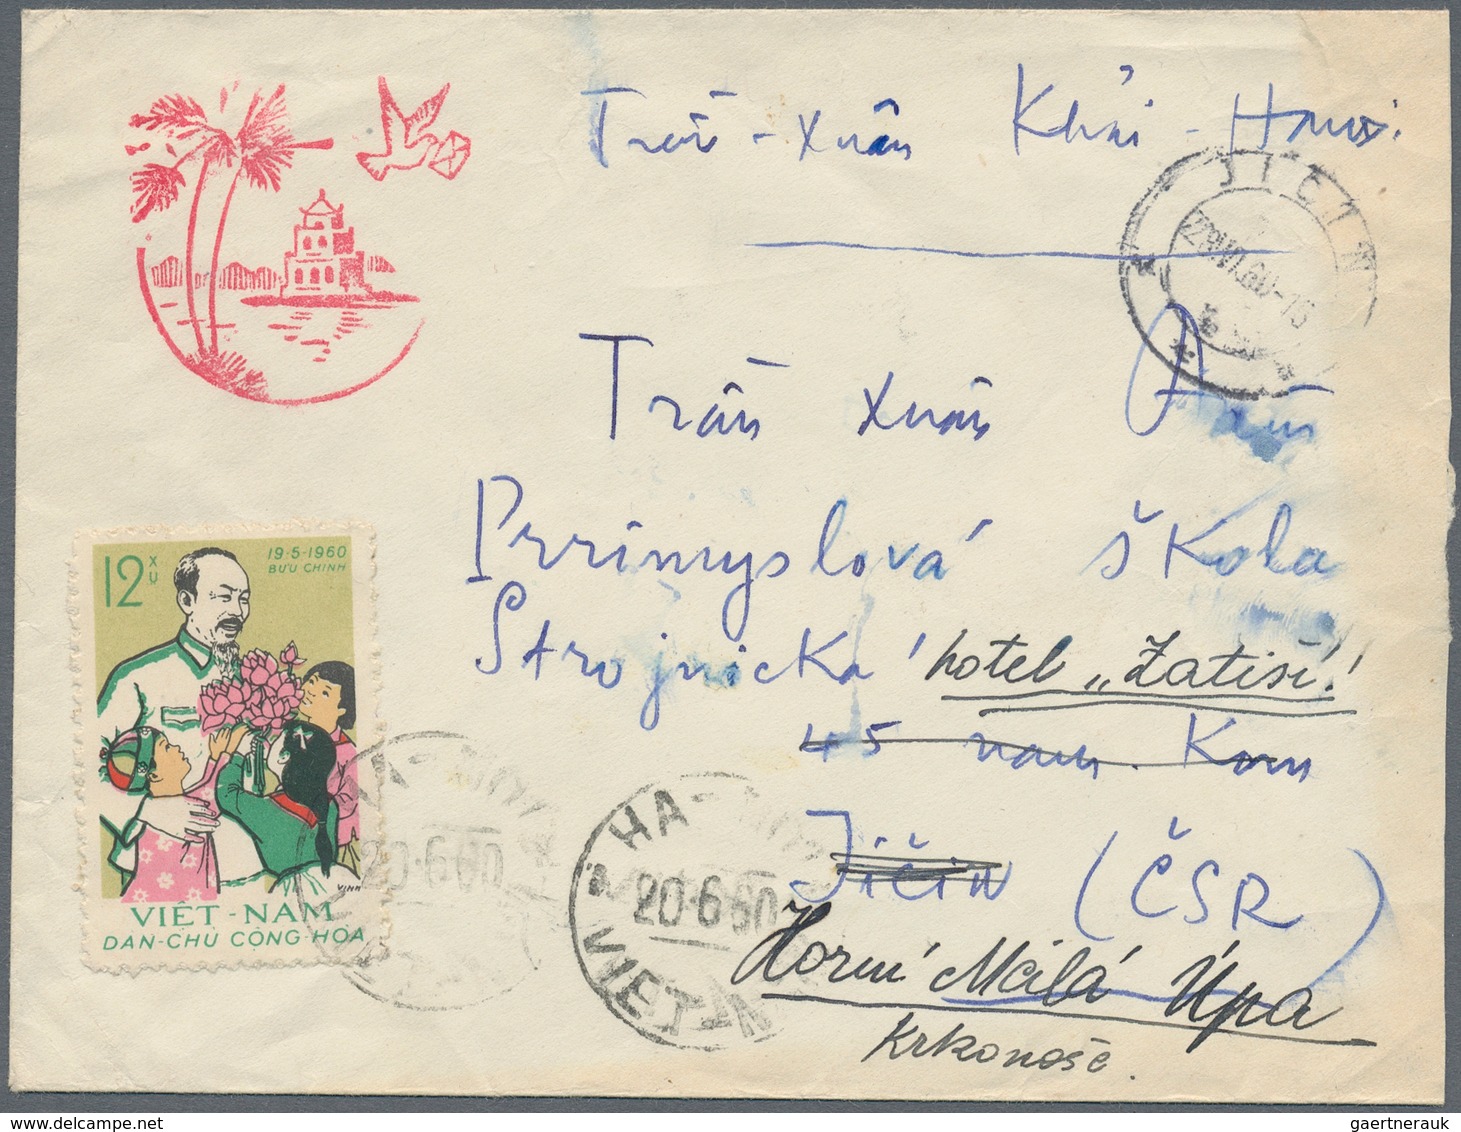 Vietnam-Nord (1945-1975): 1960/1980 (ca.), holding of apprx. 340 covers with many attractive frankin